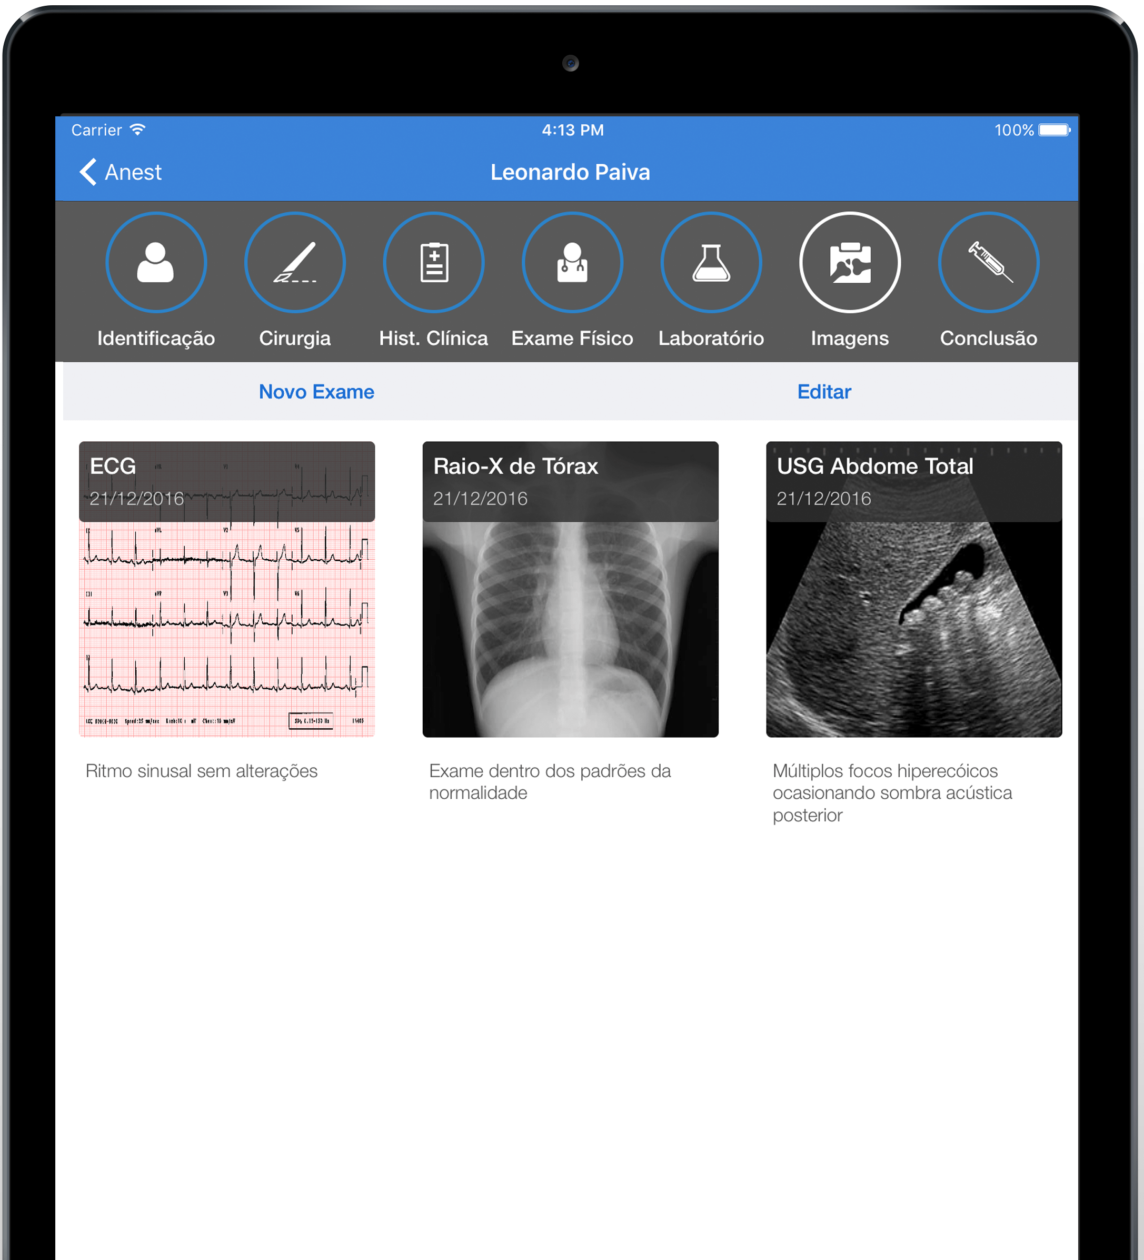 Are you an anesthetist? Then meet Anest, an iPad app that will make your life easier